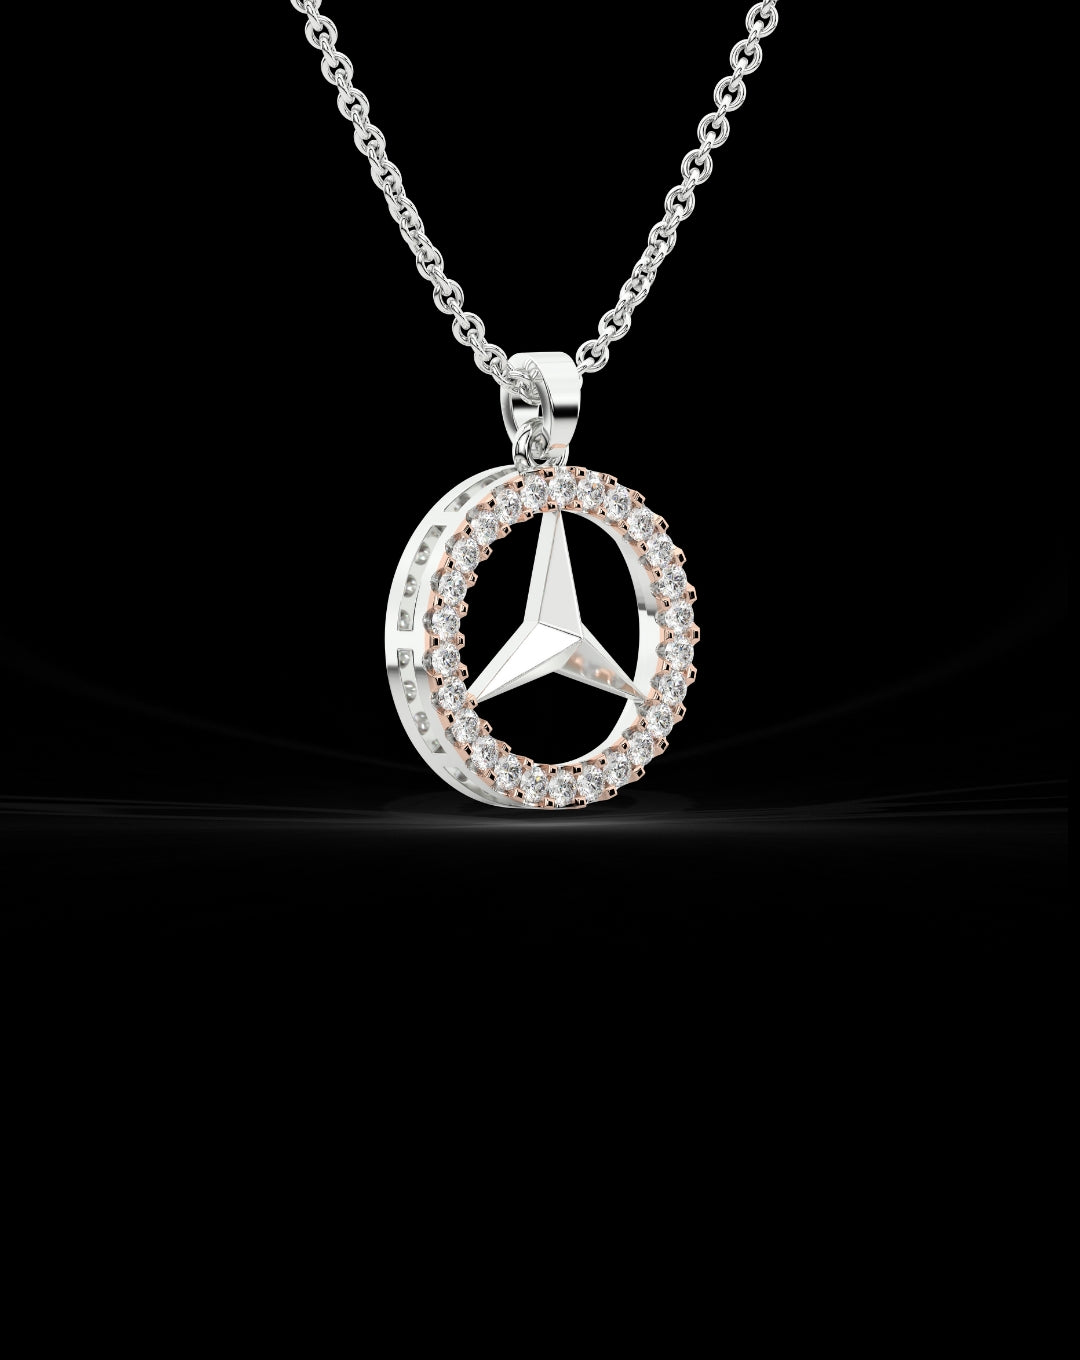 Simulated diamond 925 Sterling Silver Necklace